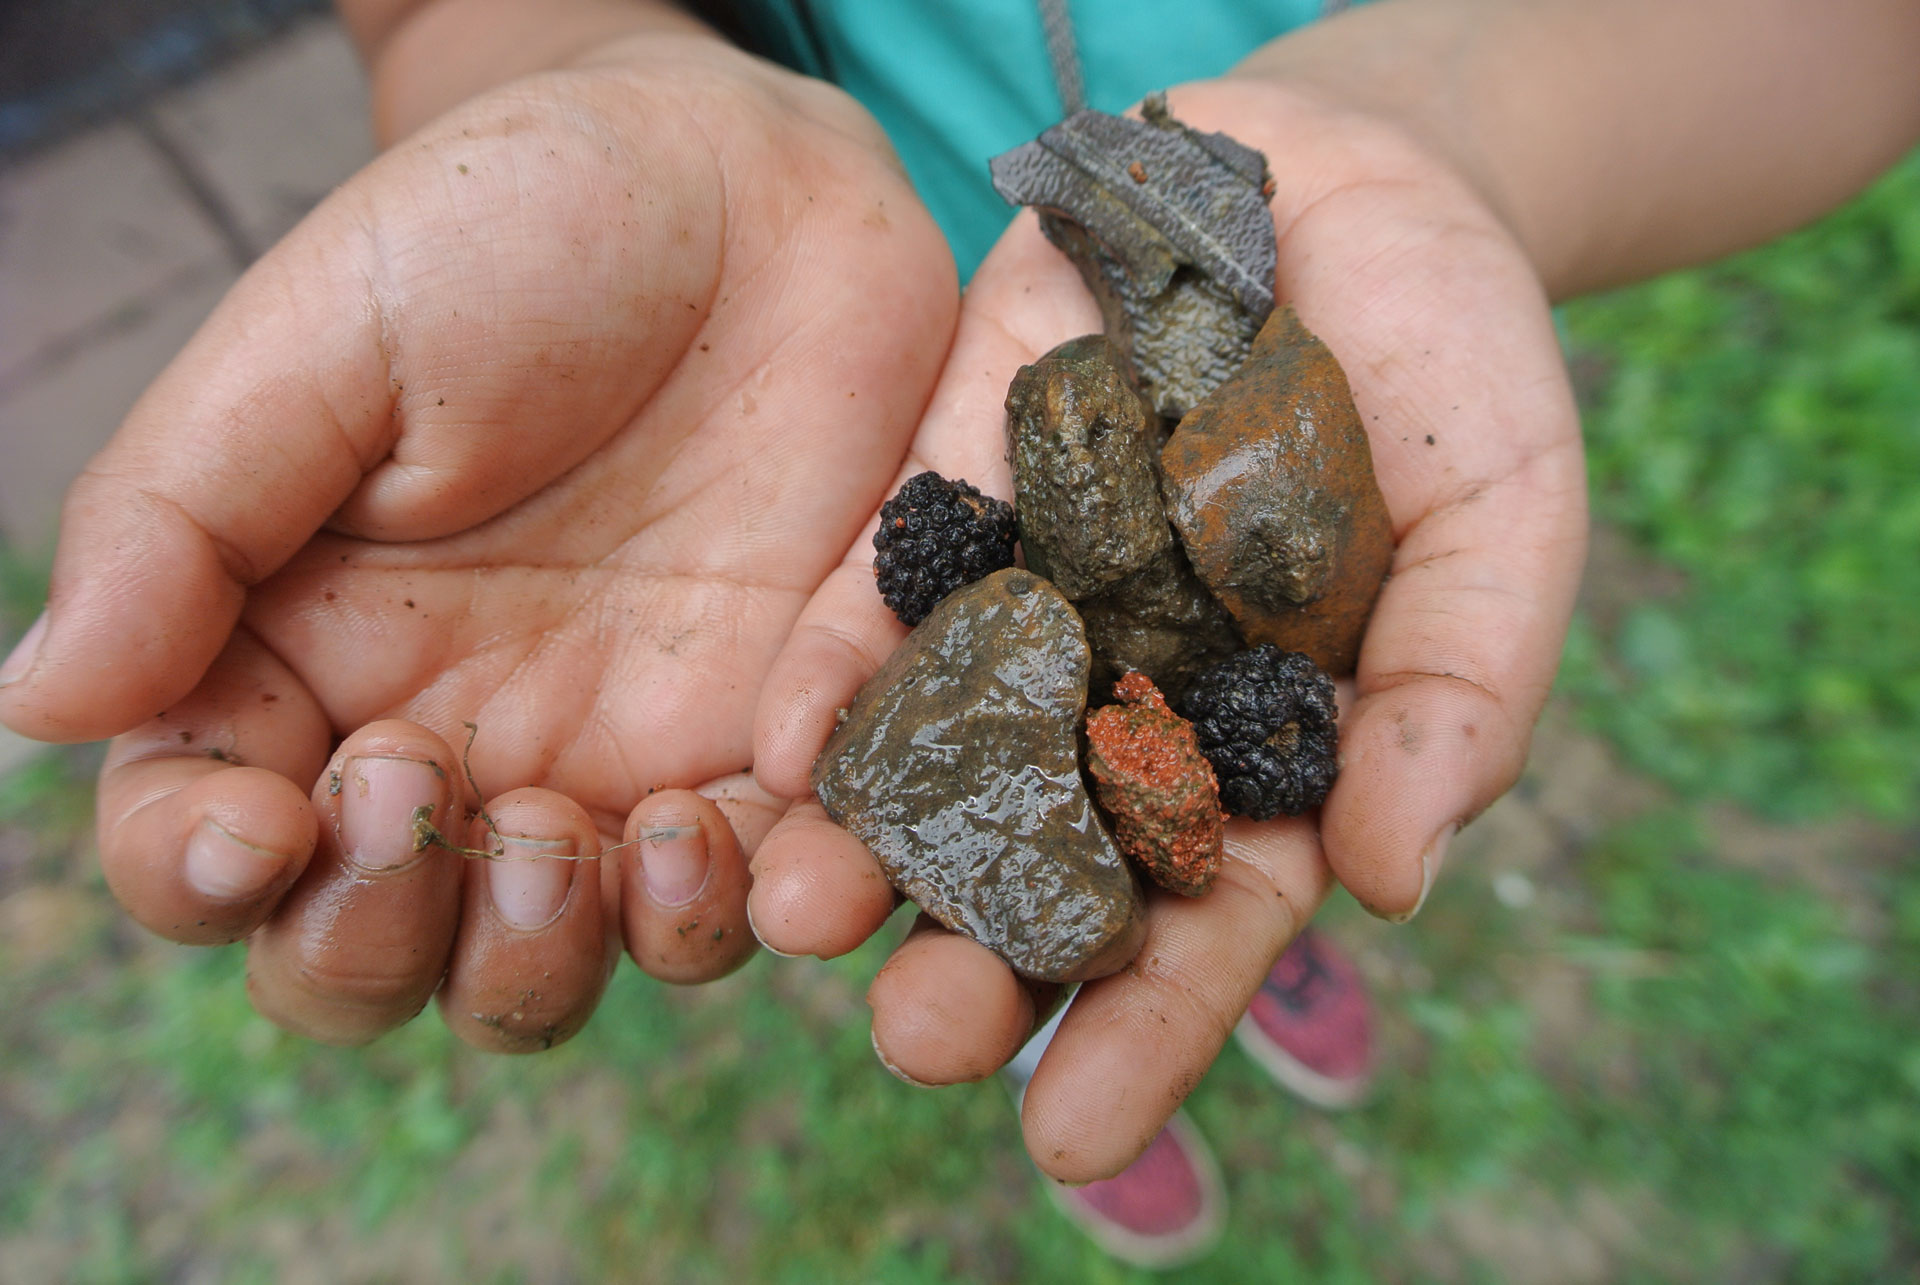 Student's hands hold rocks and berries collected in the schoolyard